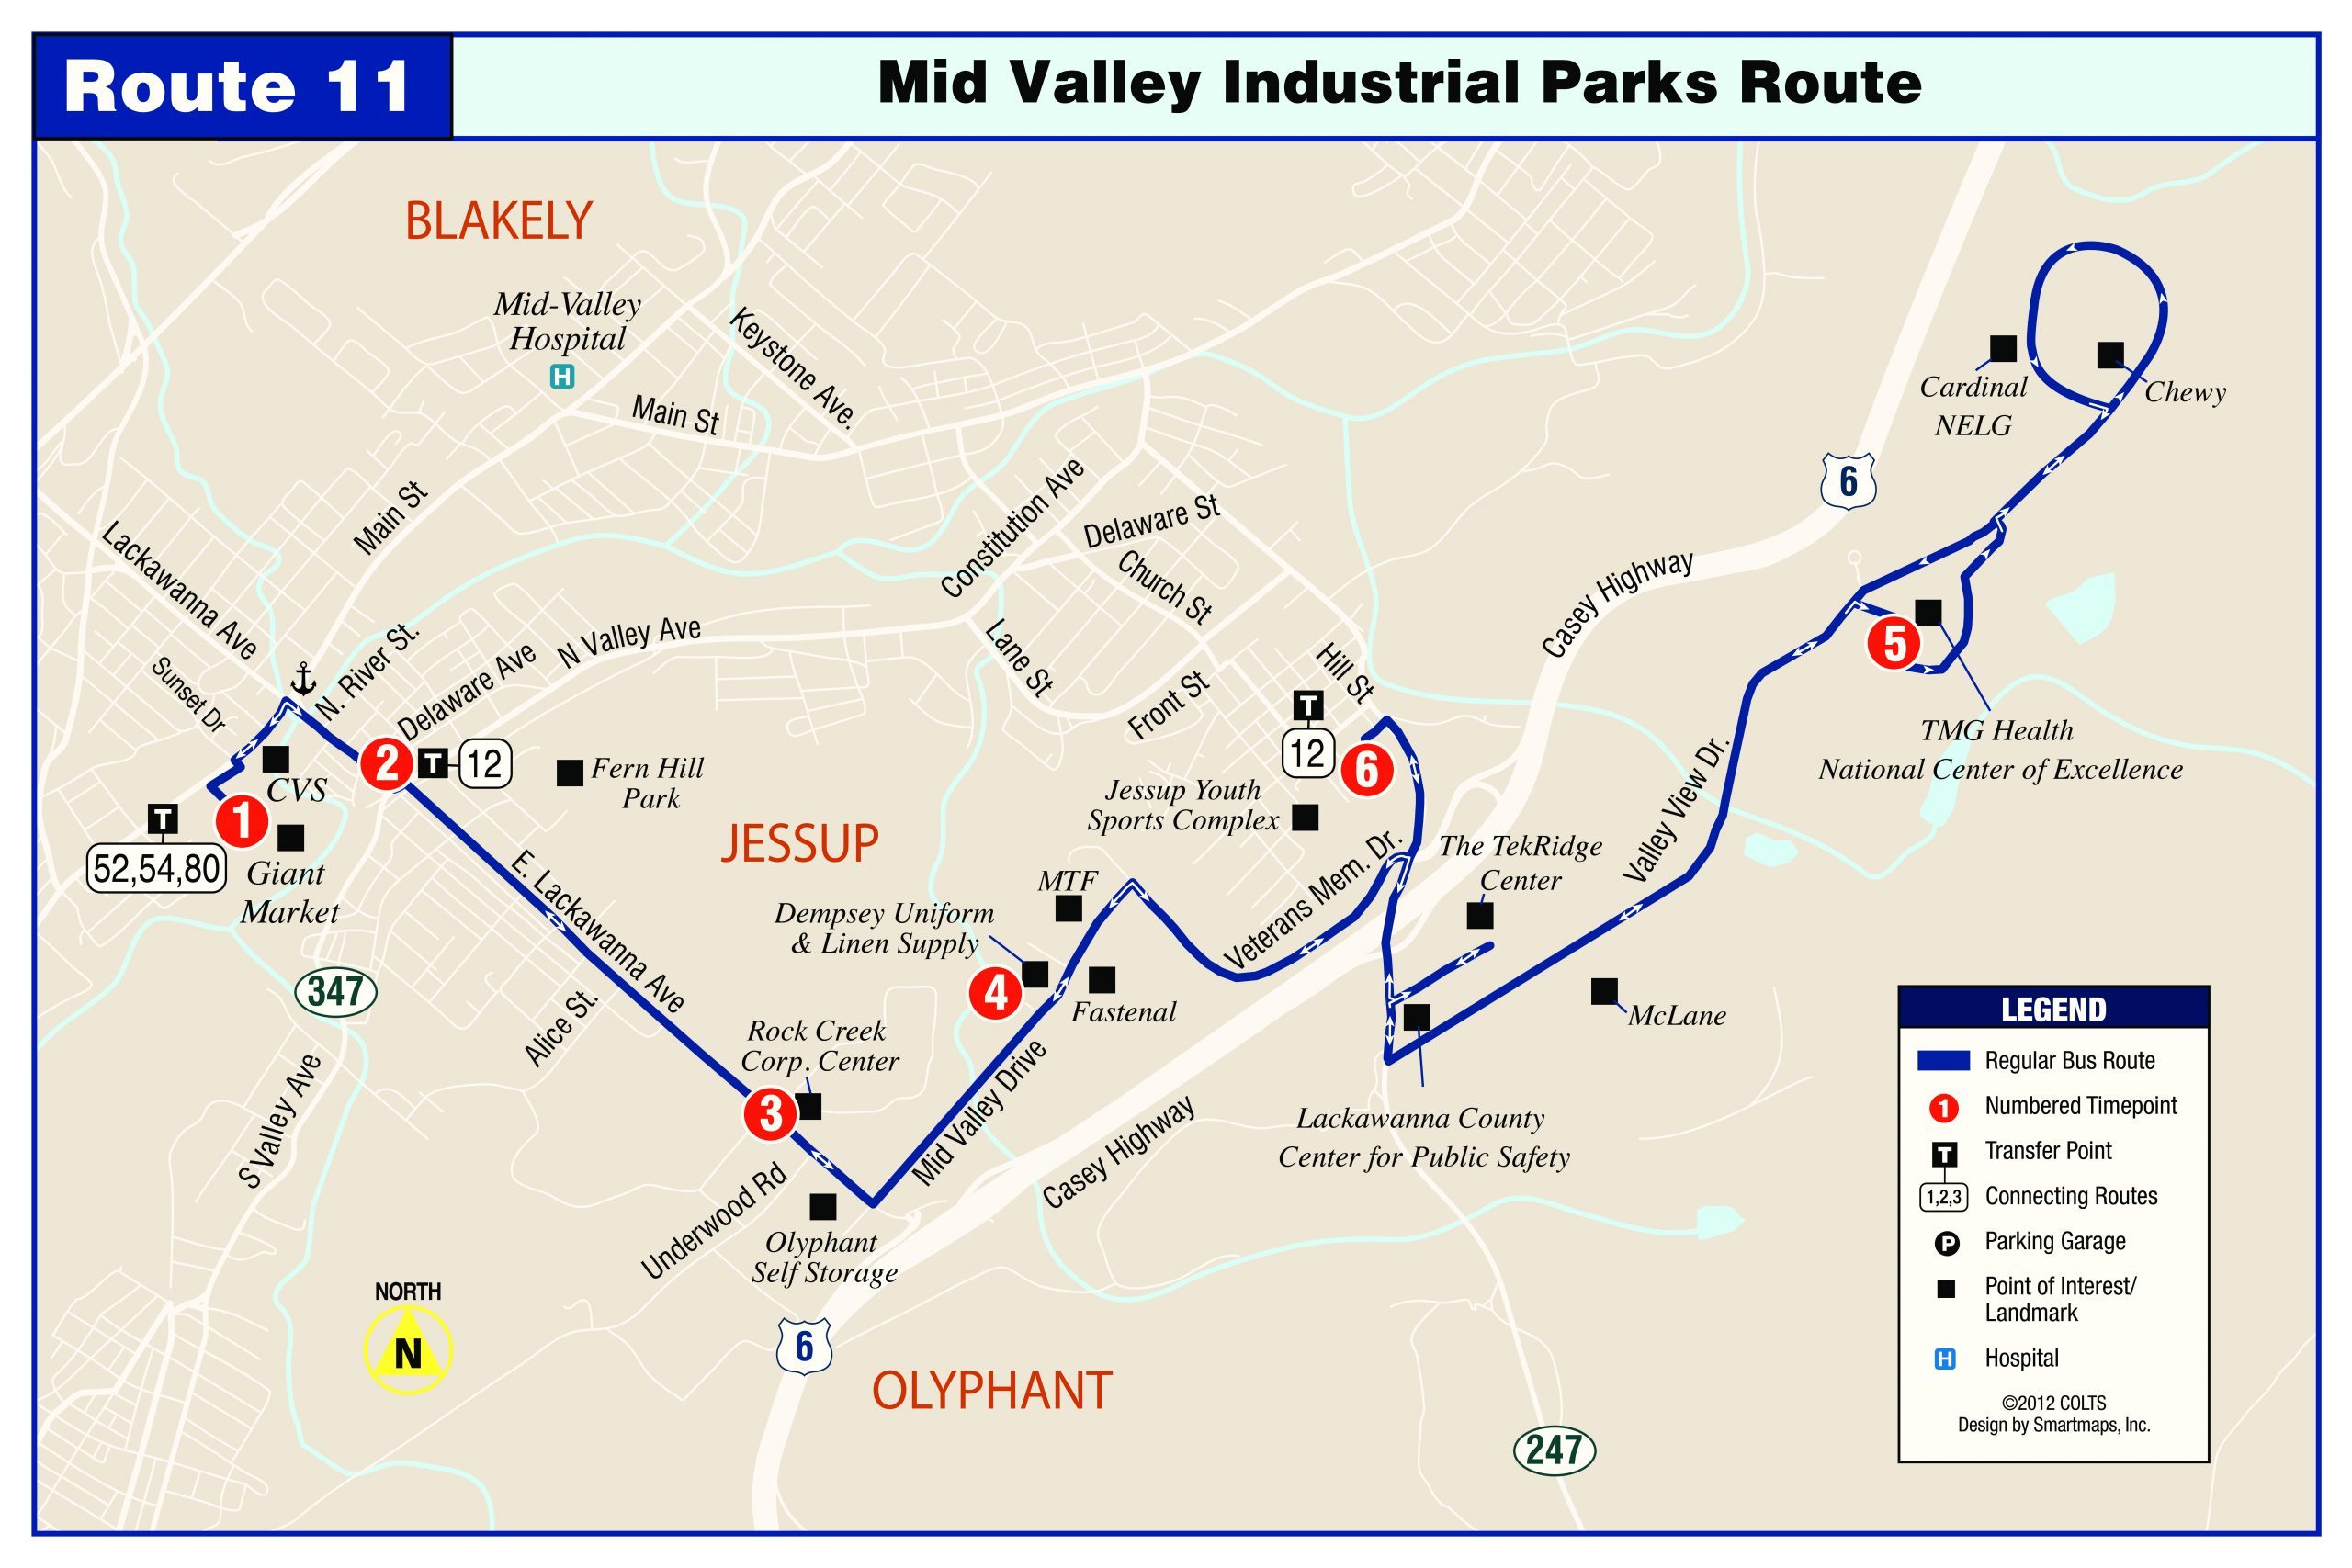 Mid Valley Industrial Park Route 11